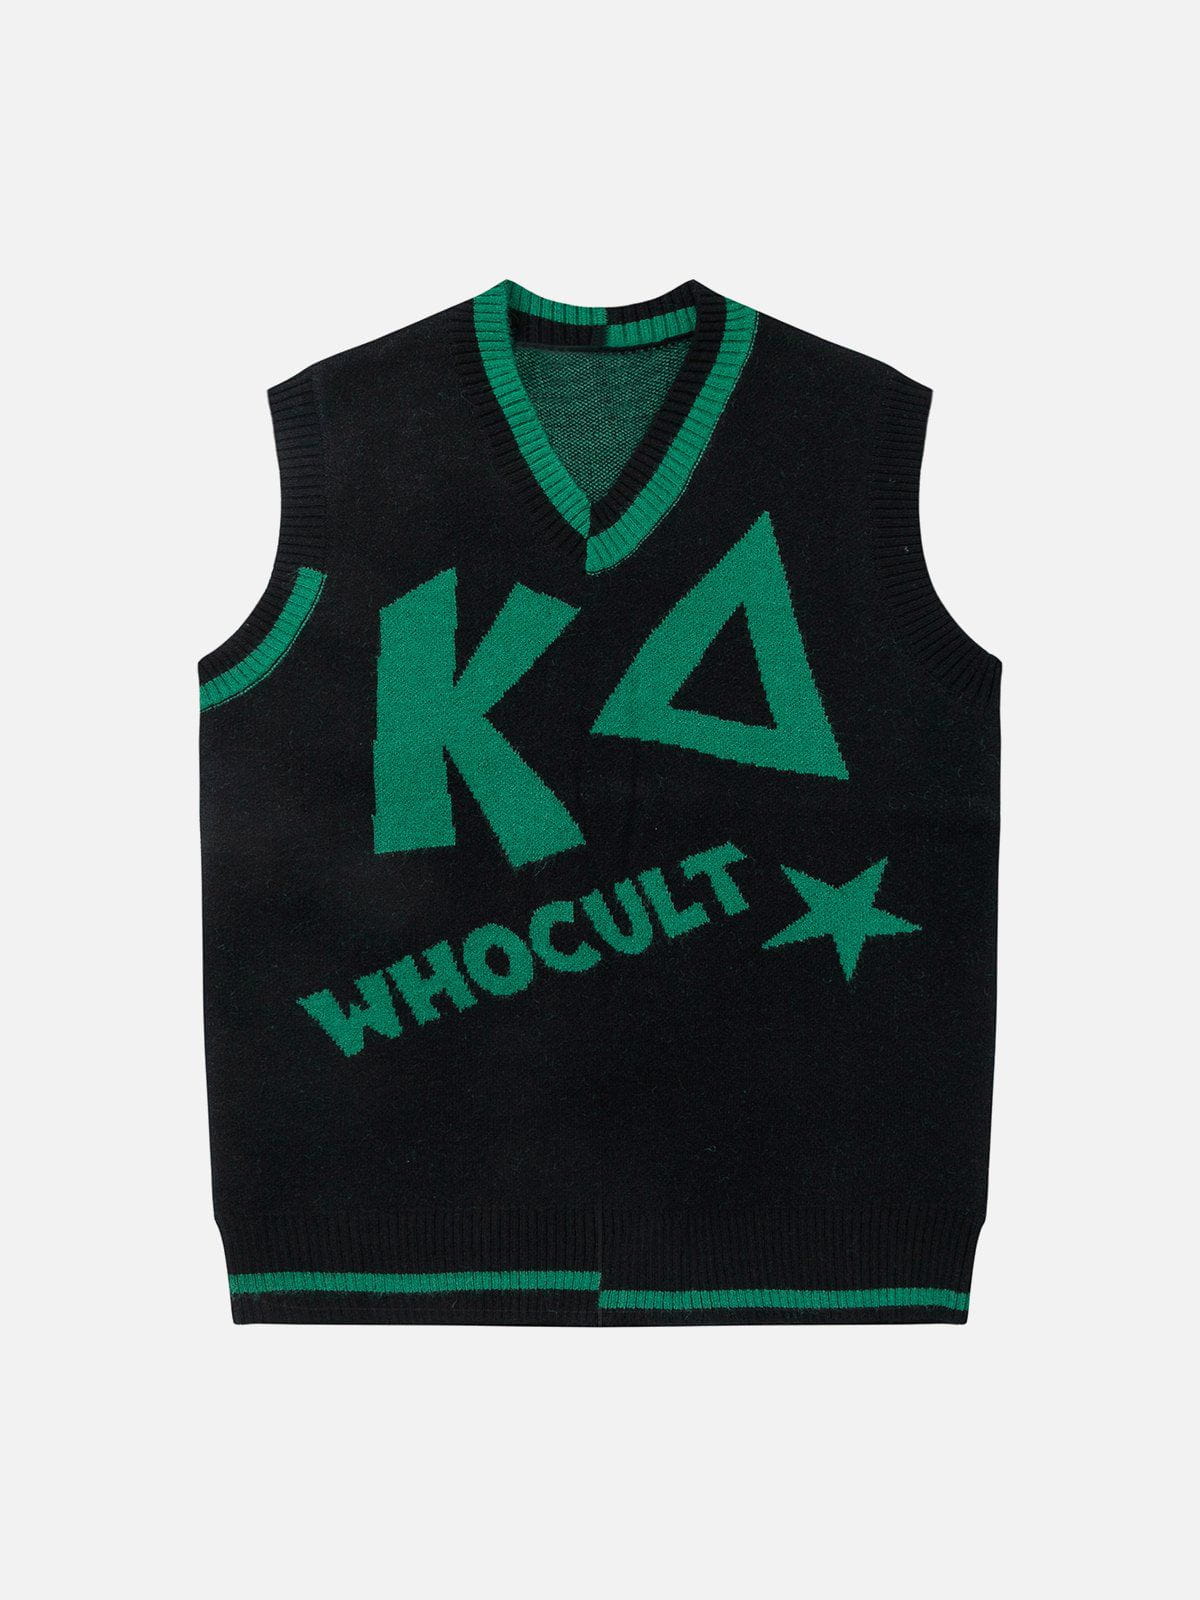 Majesda® - WHOCULT Embroidery Sweater Vest outfit ideas streetwear fashion